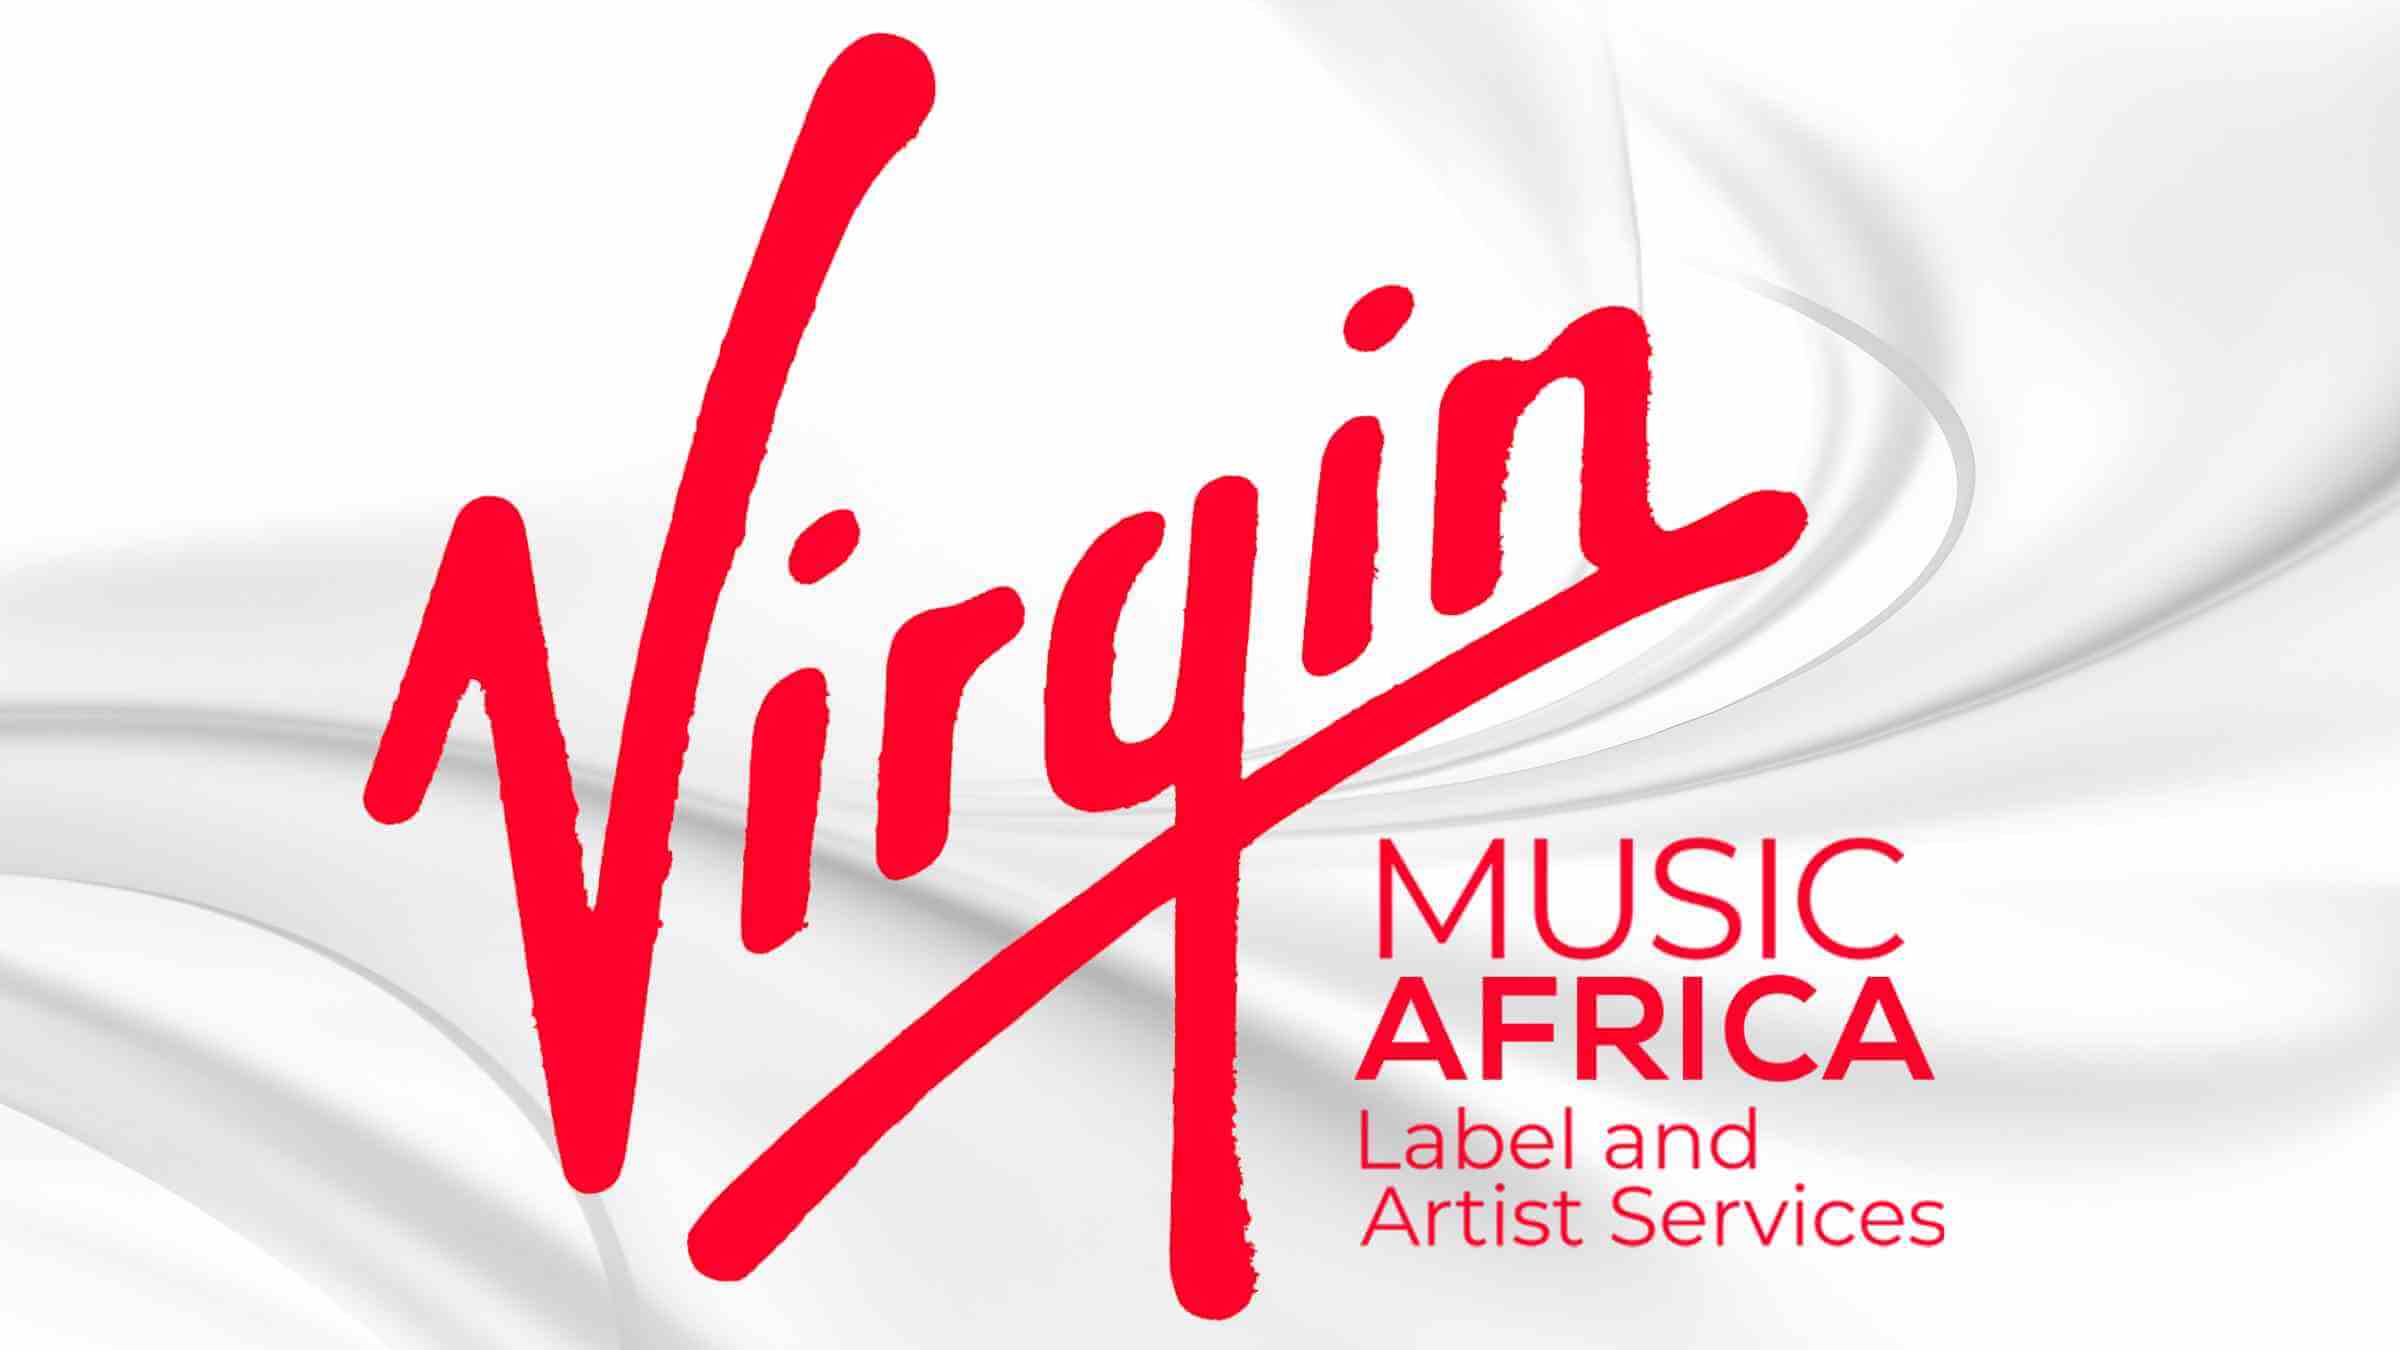 Virgin Music Label And Artiste Services Launches In Africa